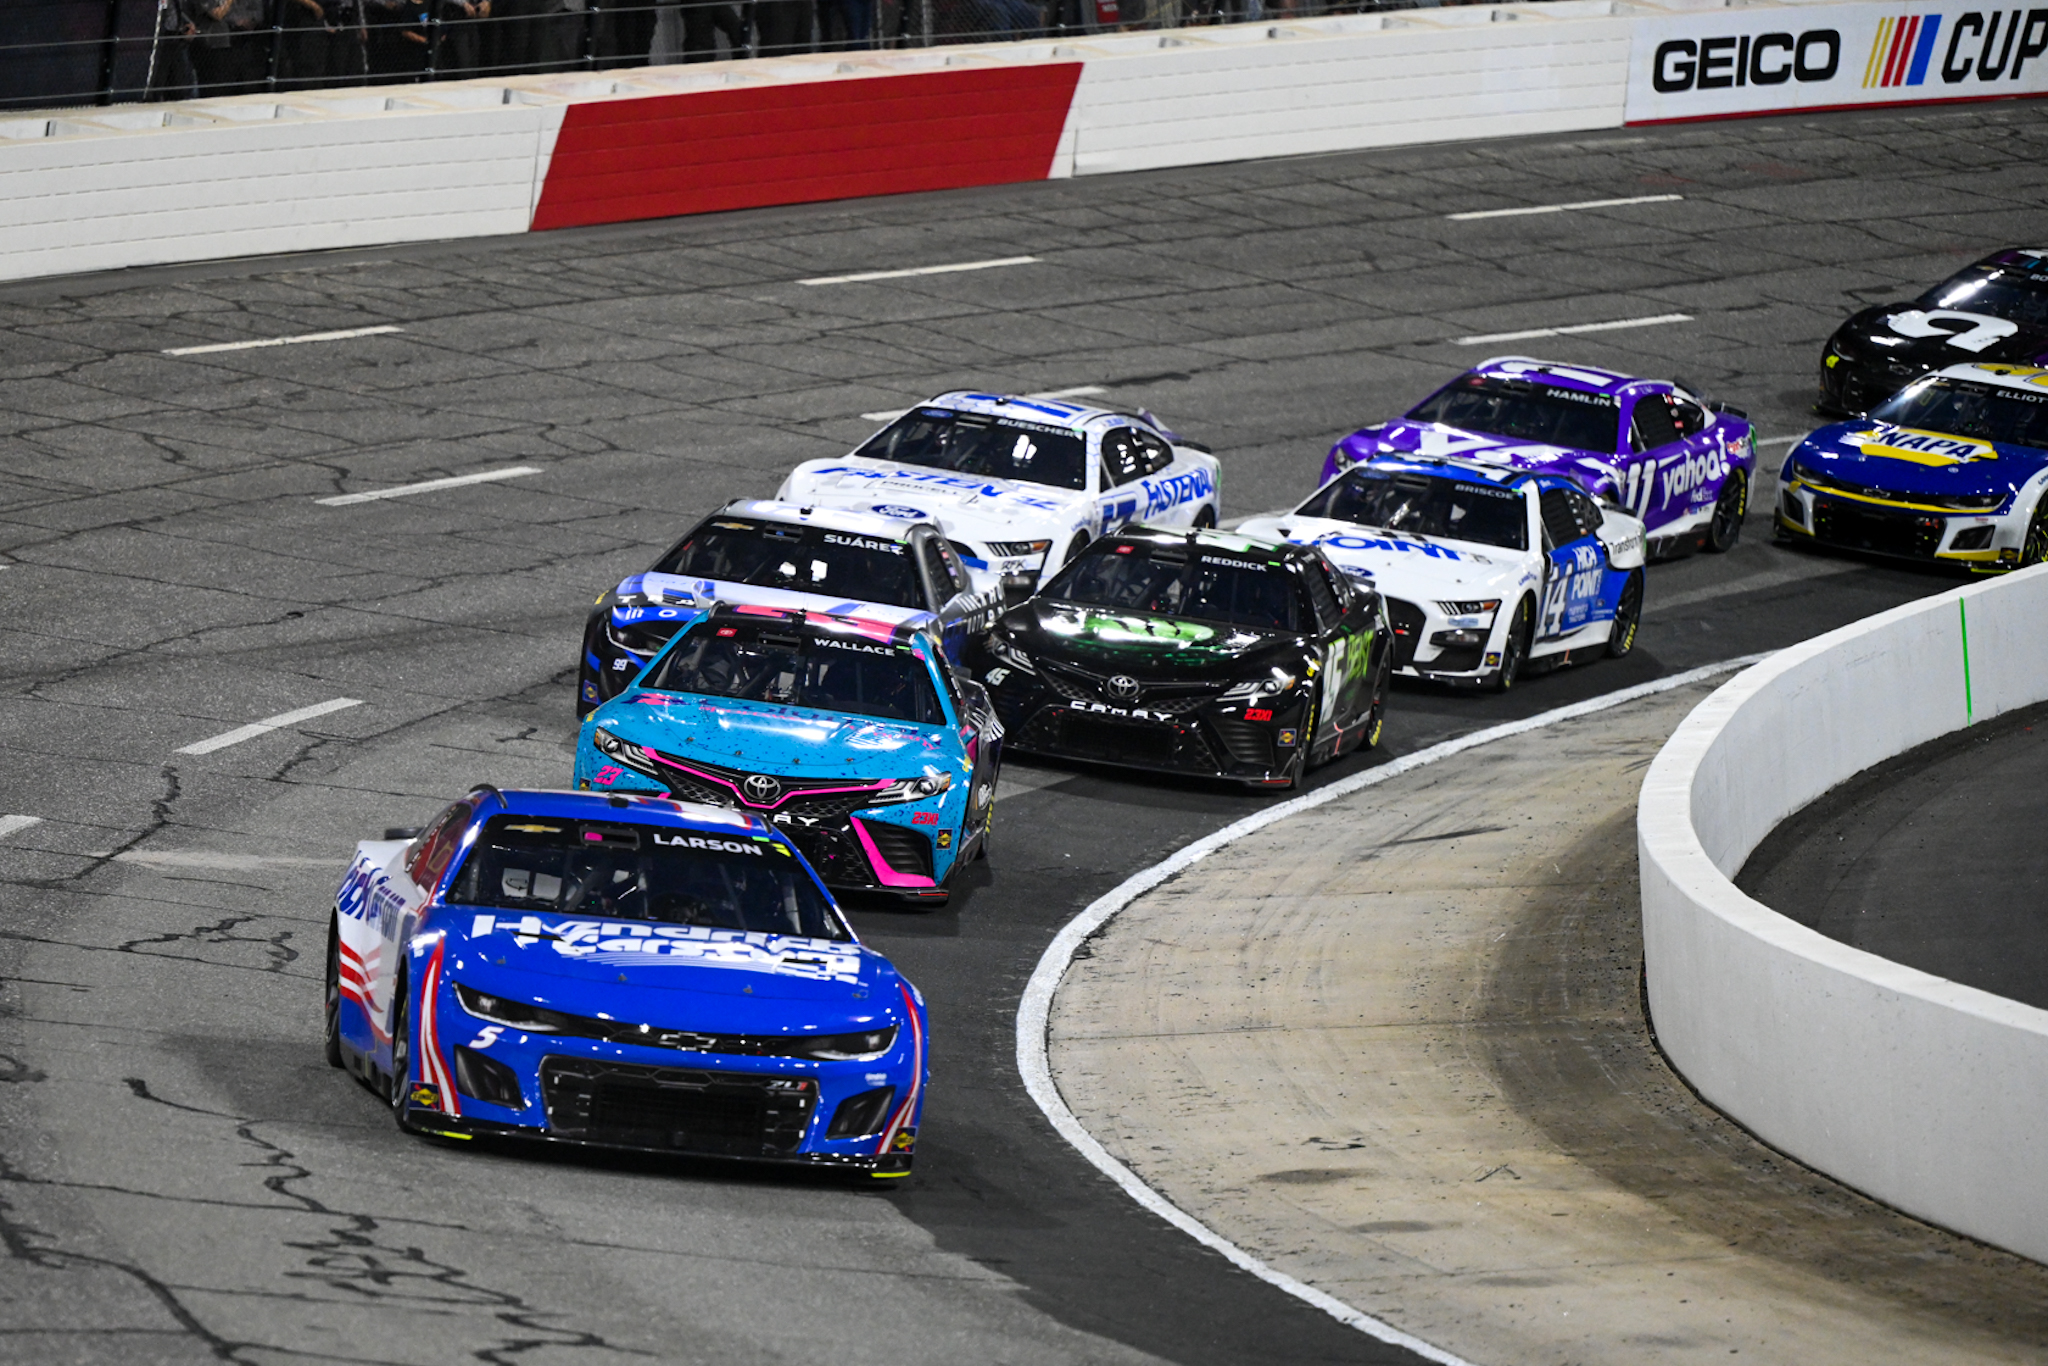 The Lap 111 restart was about as close as Larson's competitor were to making any challenge for the win. (Photo: Kevin Ritchie | The Podium Finish)